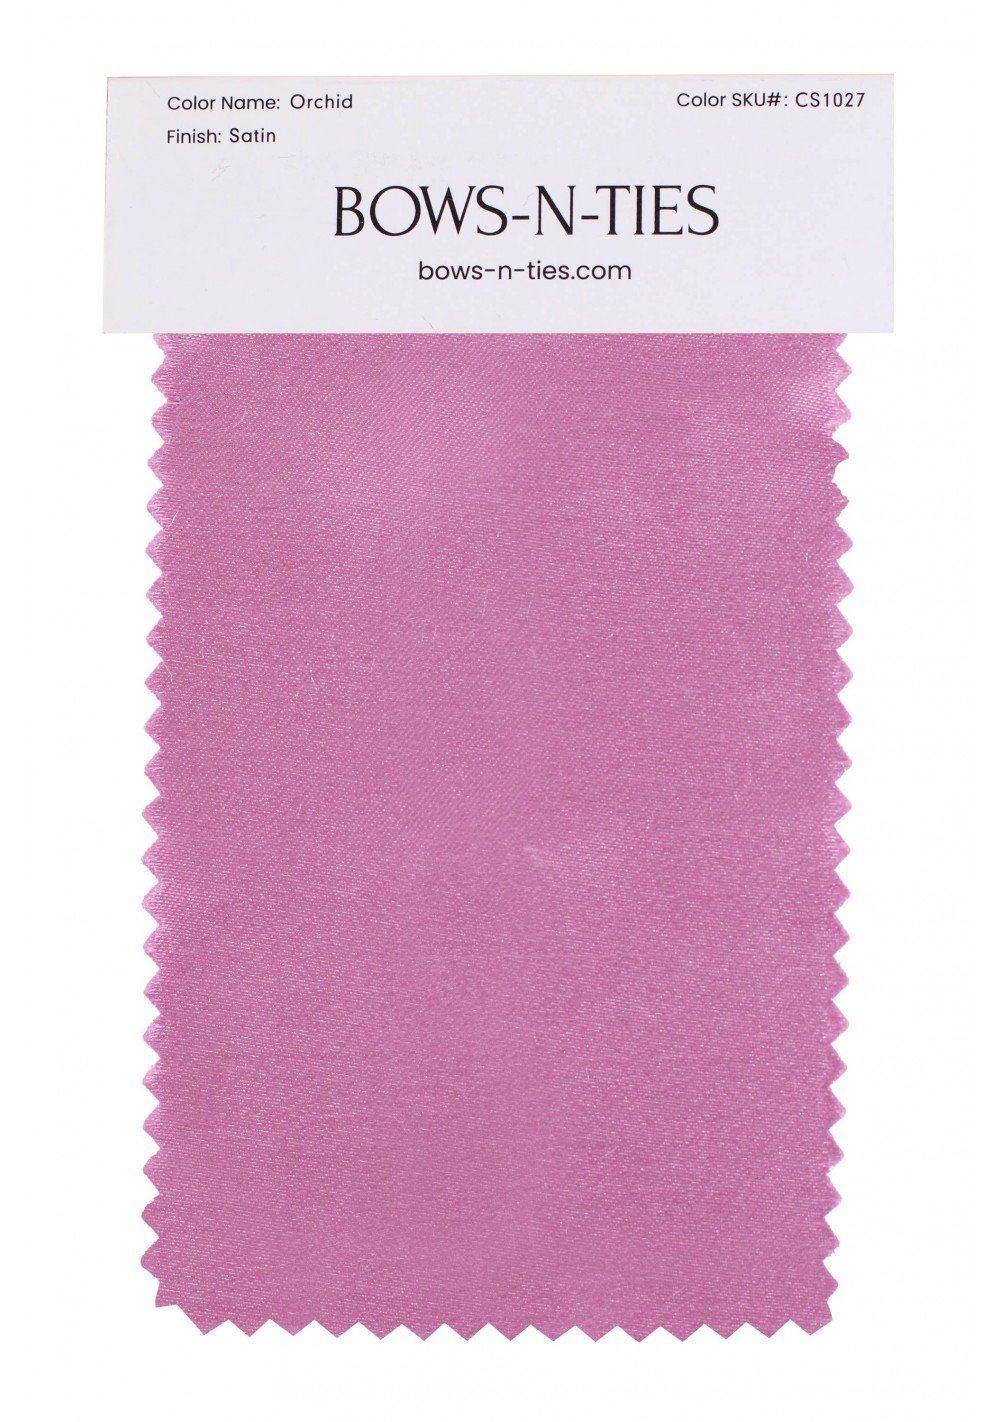 Satin Fabric Swatch - Orchid